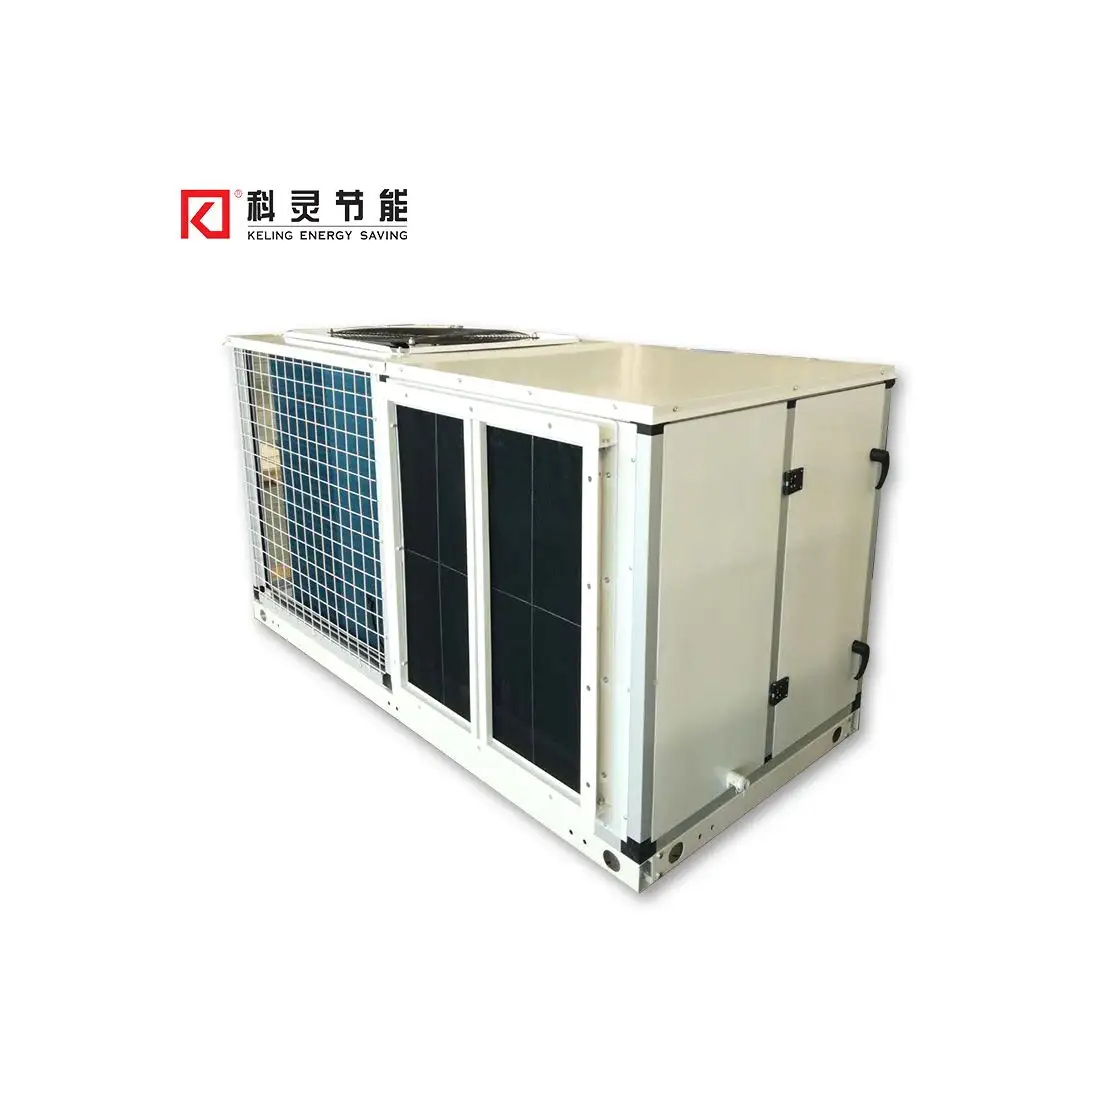 Hot Selling Product 3 Ton Air Cooled Rooftop Packaged Air Conditioner Units Carrier